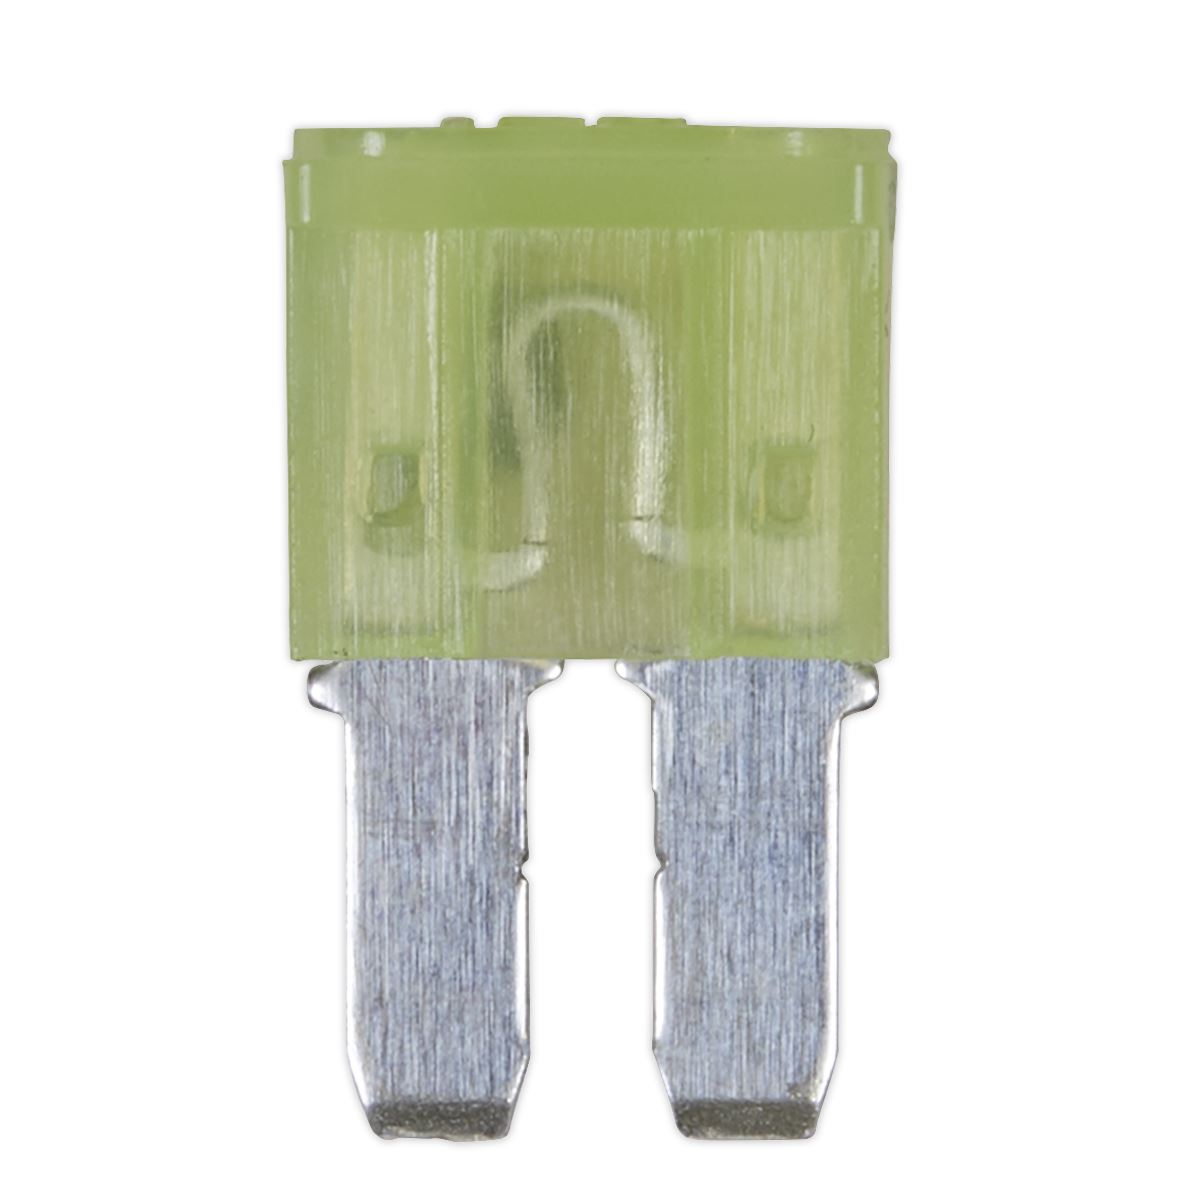 Sealey Automotive MICRO II Blade Fuse 20A - Pack of 50